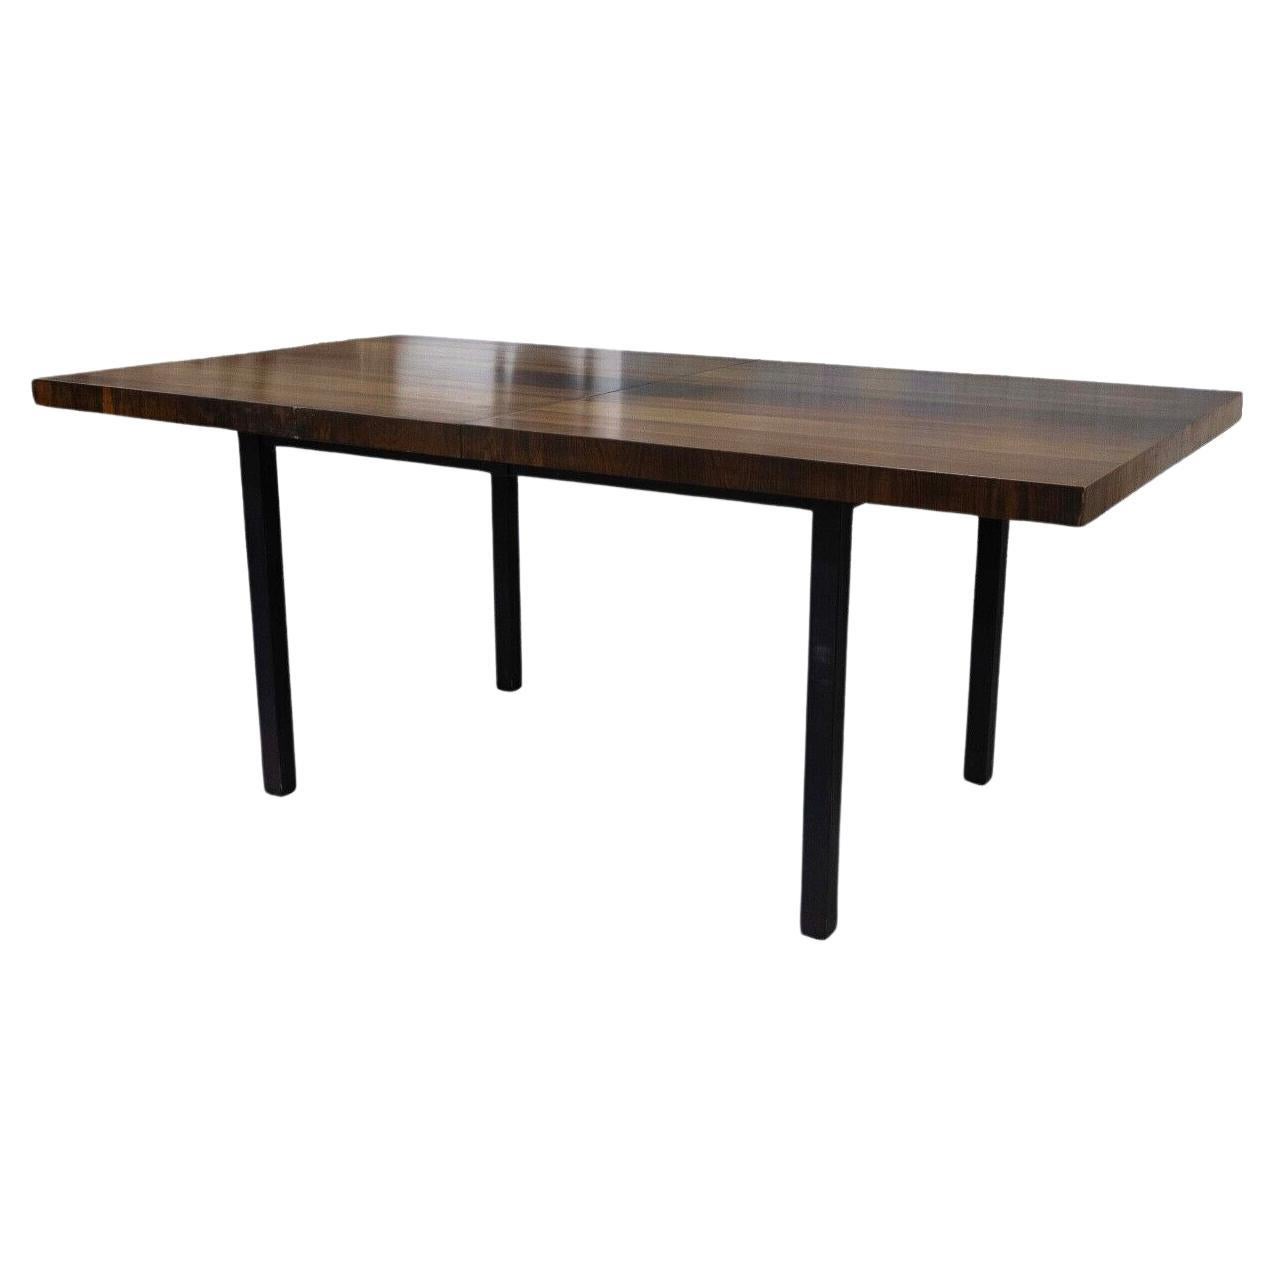 Milo Baughman for Directional Expandable Dining Table w/ Leaf Mid Century Modern